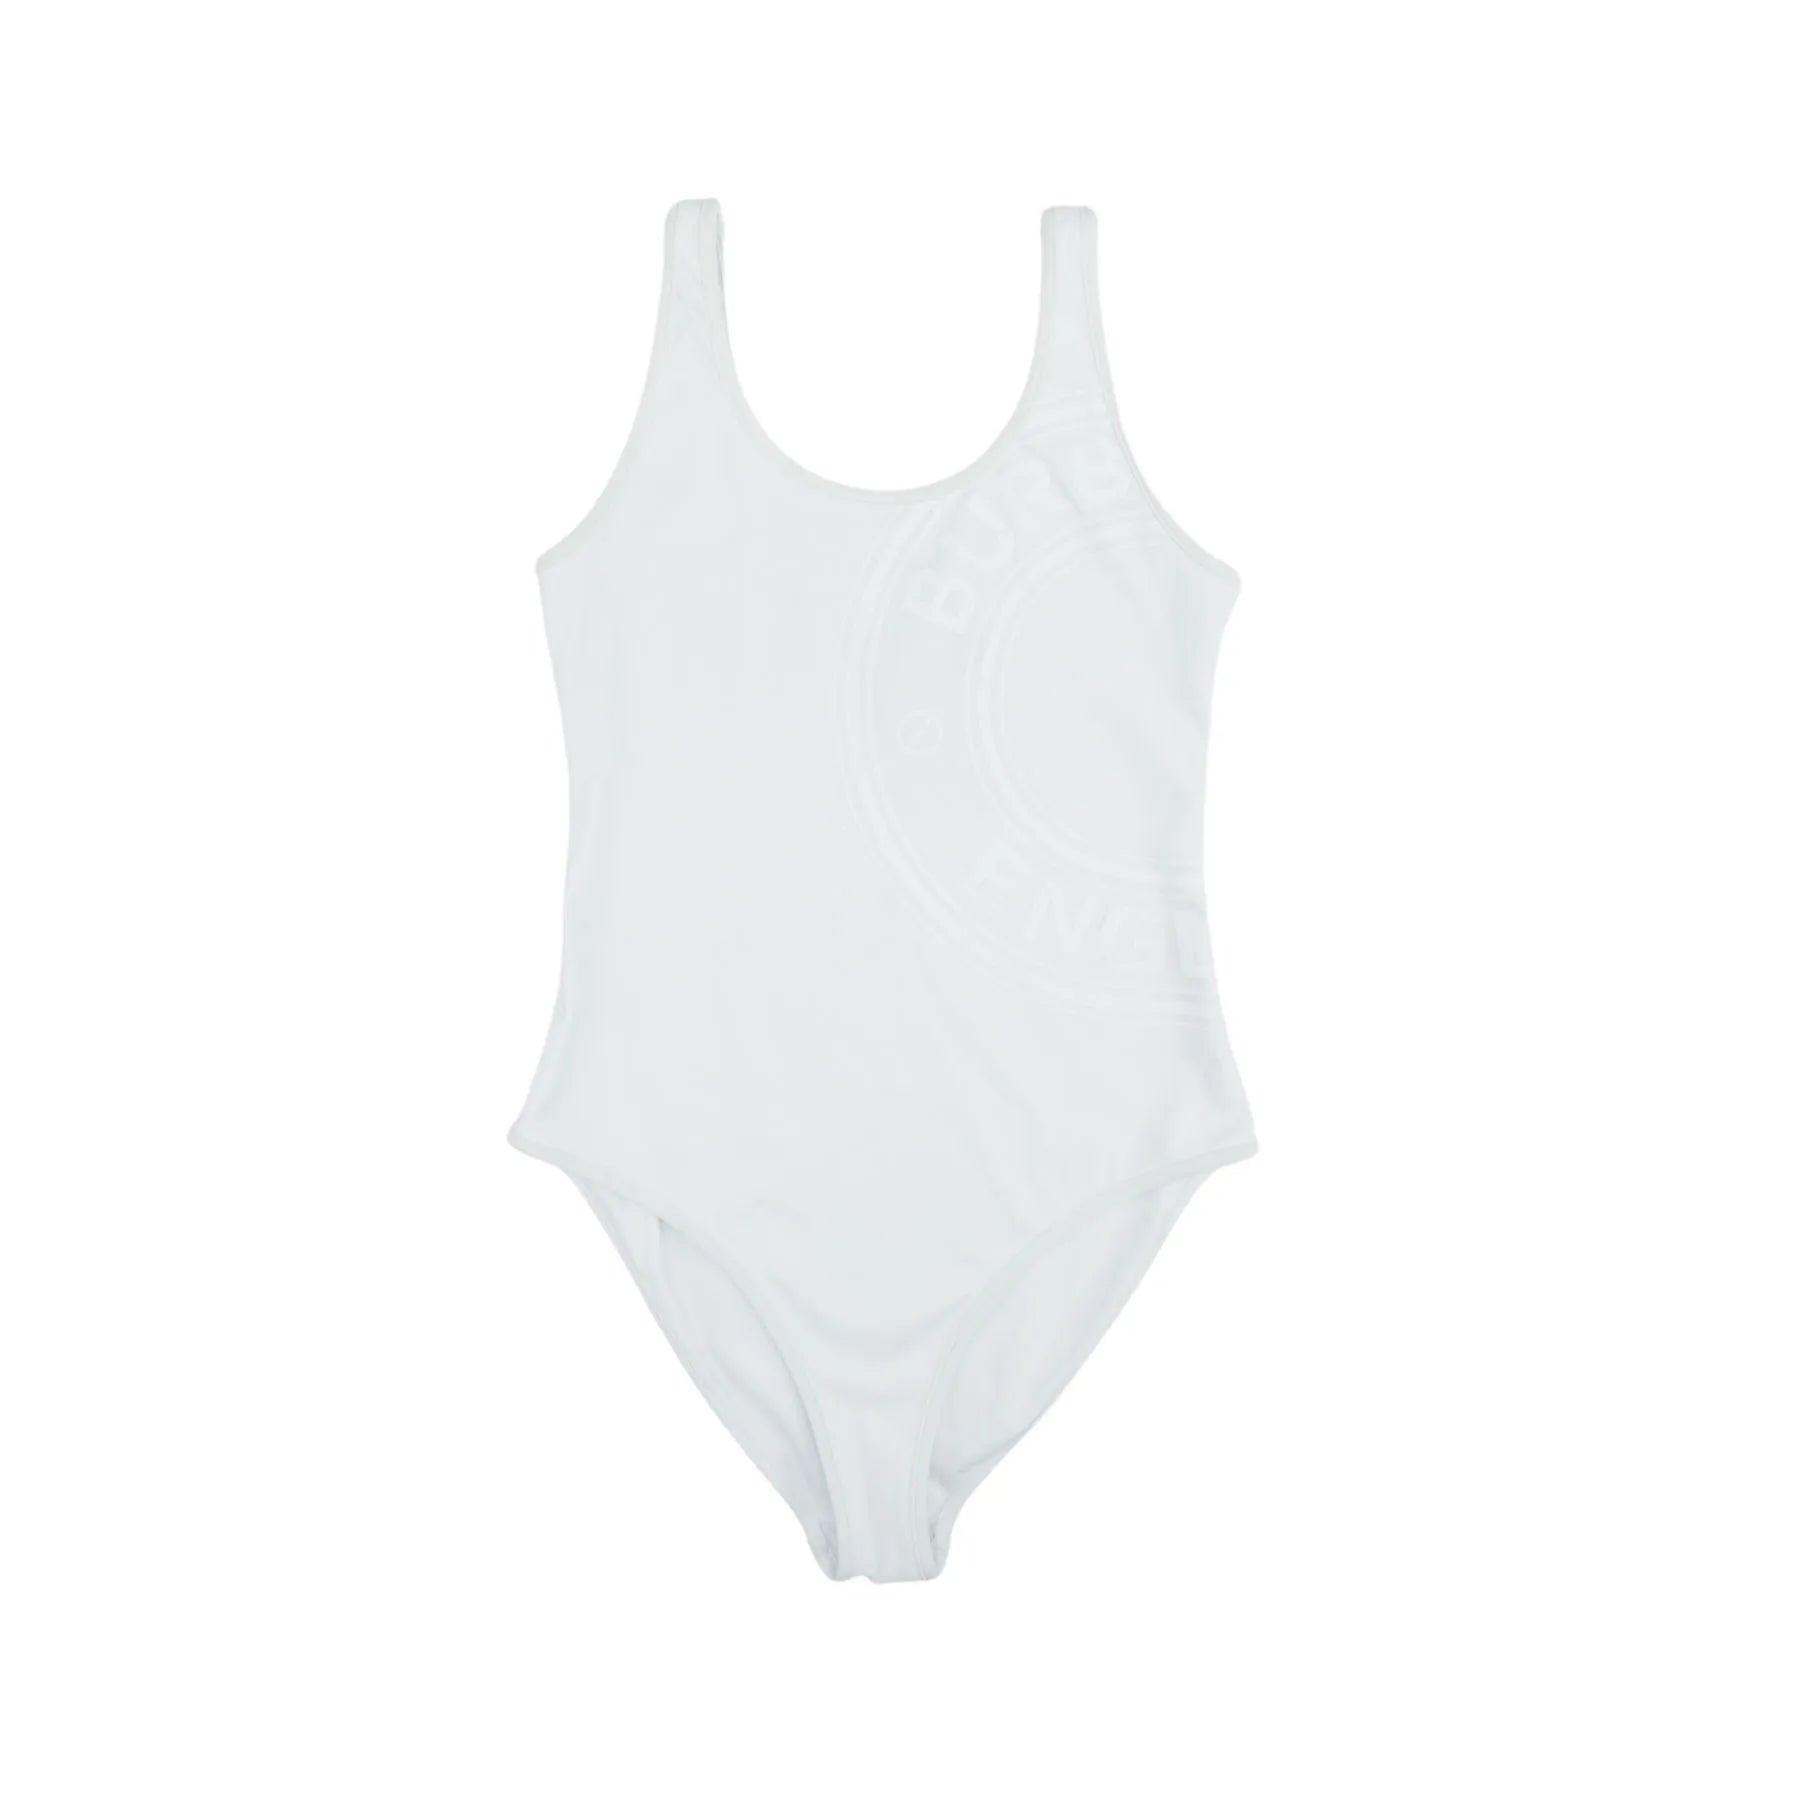 Burberry One-Piece Bathing Suit - Women's S - Fashionably Yours